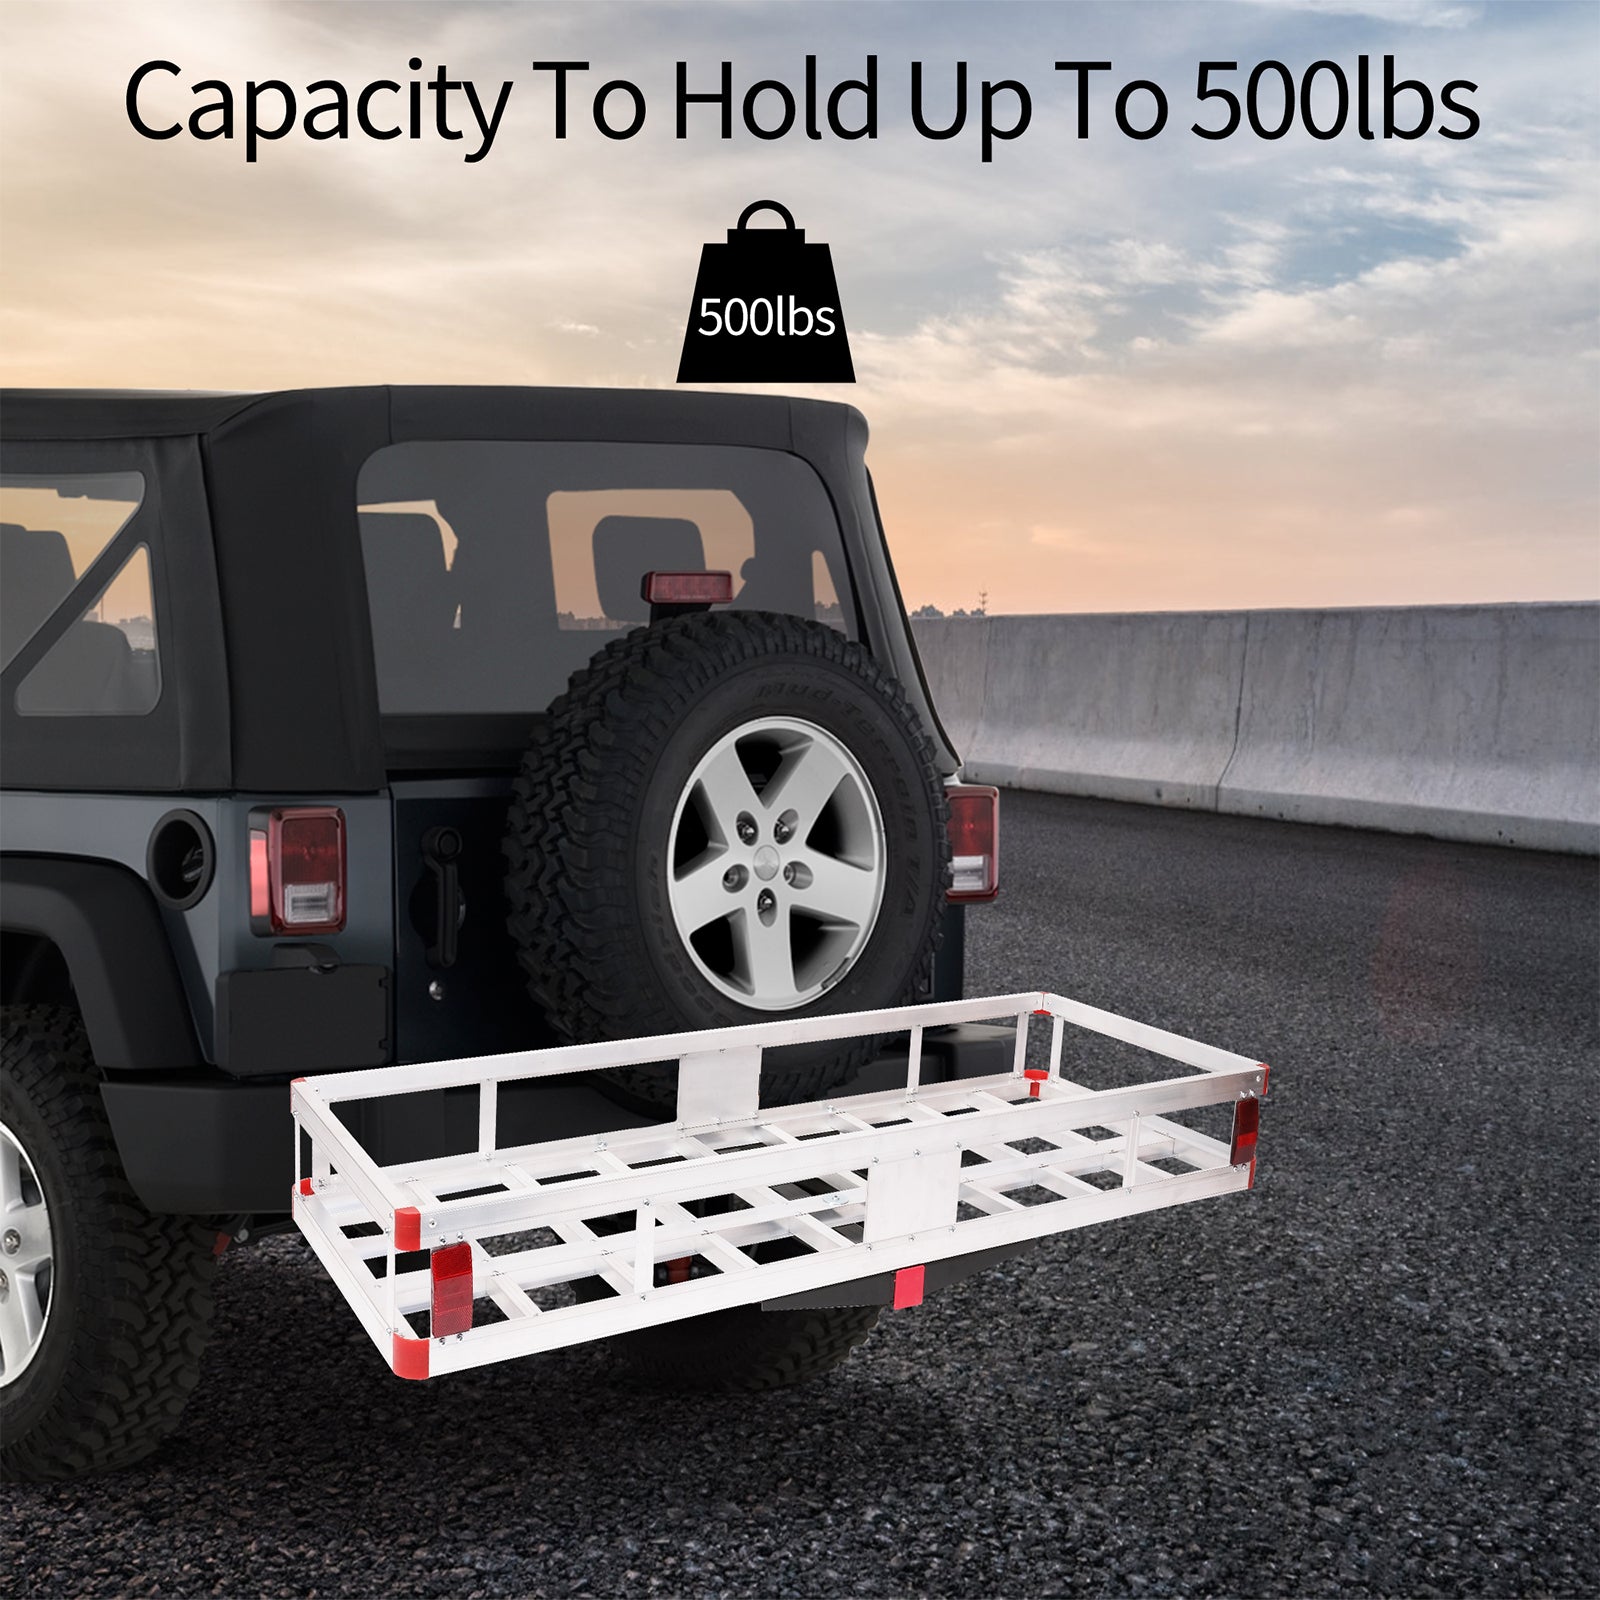 60"x 22"x 7" Hitch Mount Aluminum Cargo Carrier Basket Folding Cargo Rack with 2" Receiver, Silver